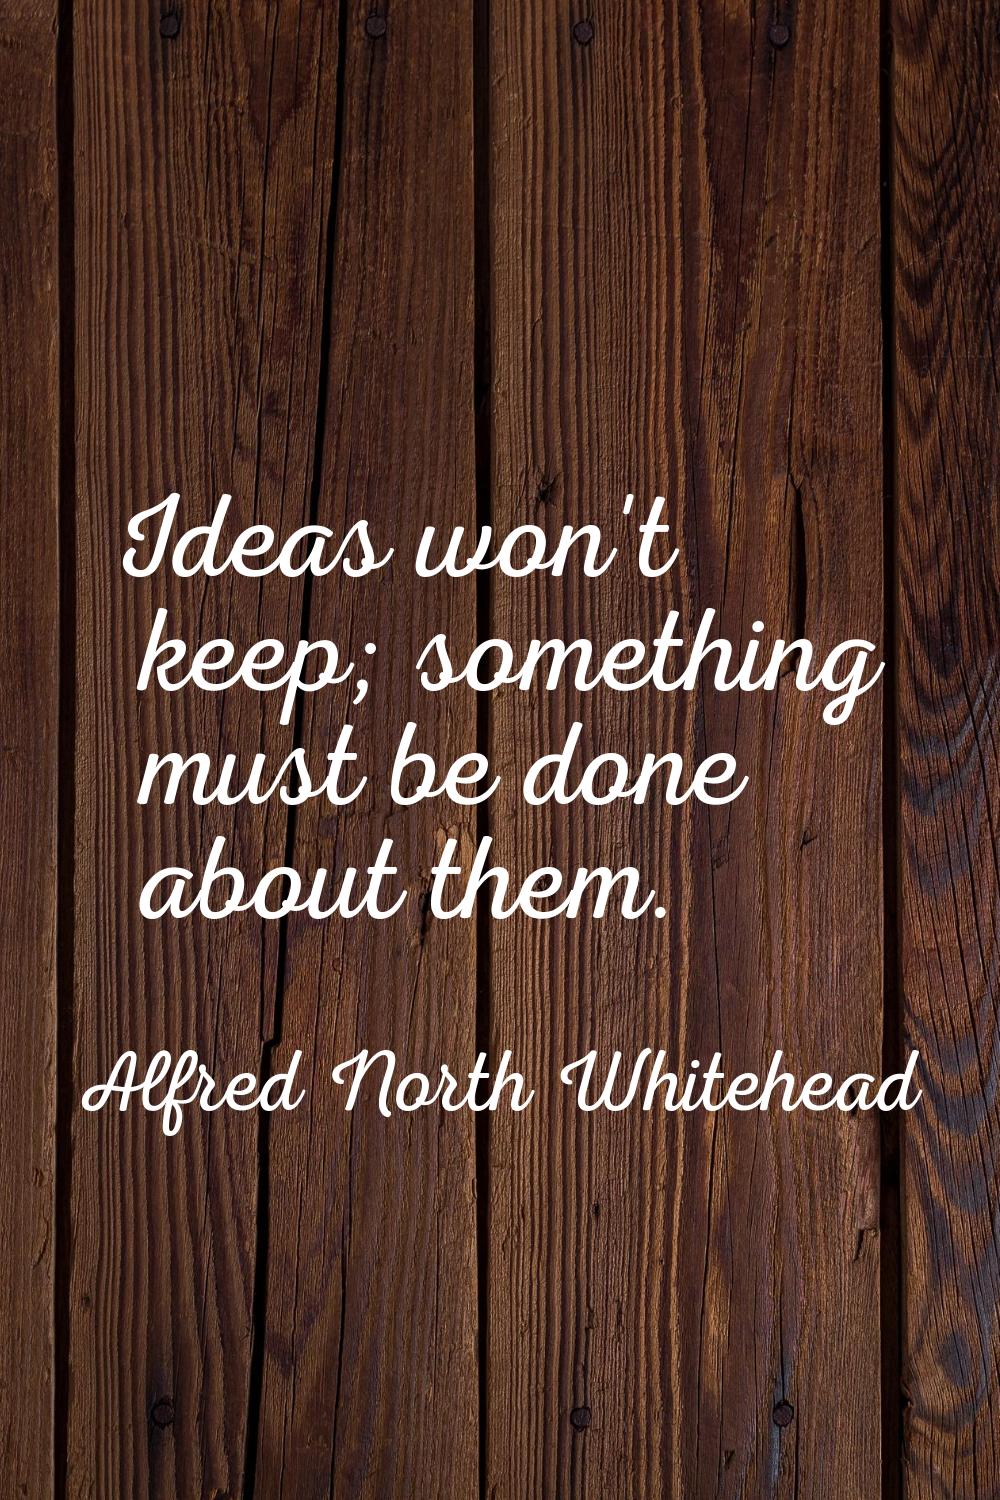 Ideas won't keep; something must be done about them.